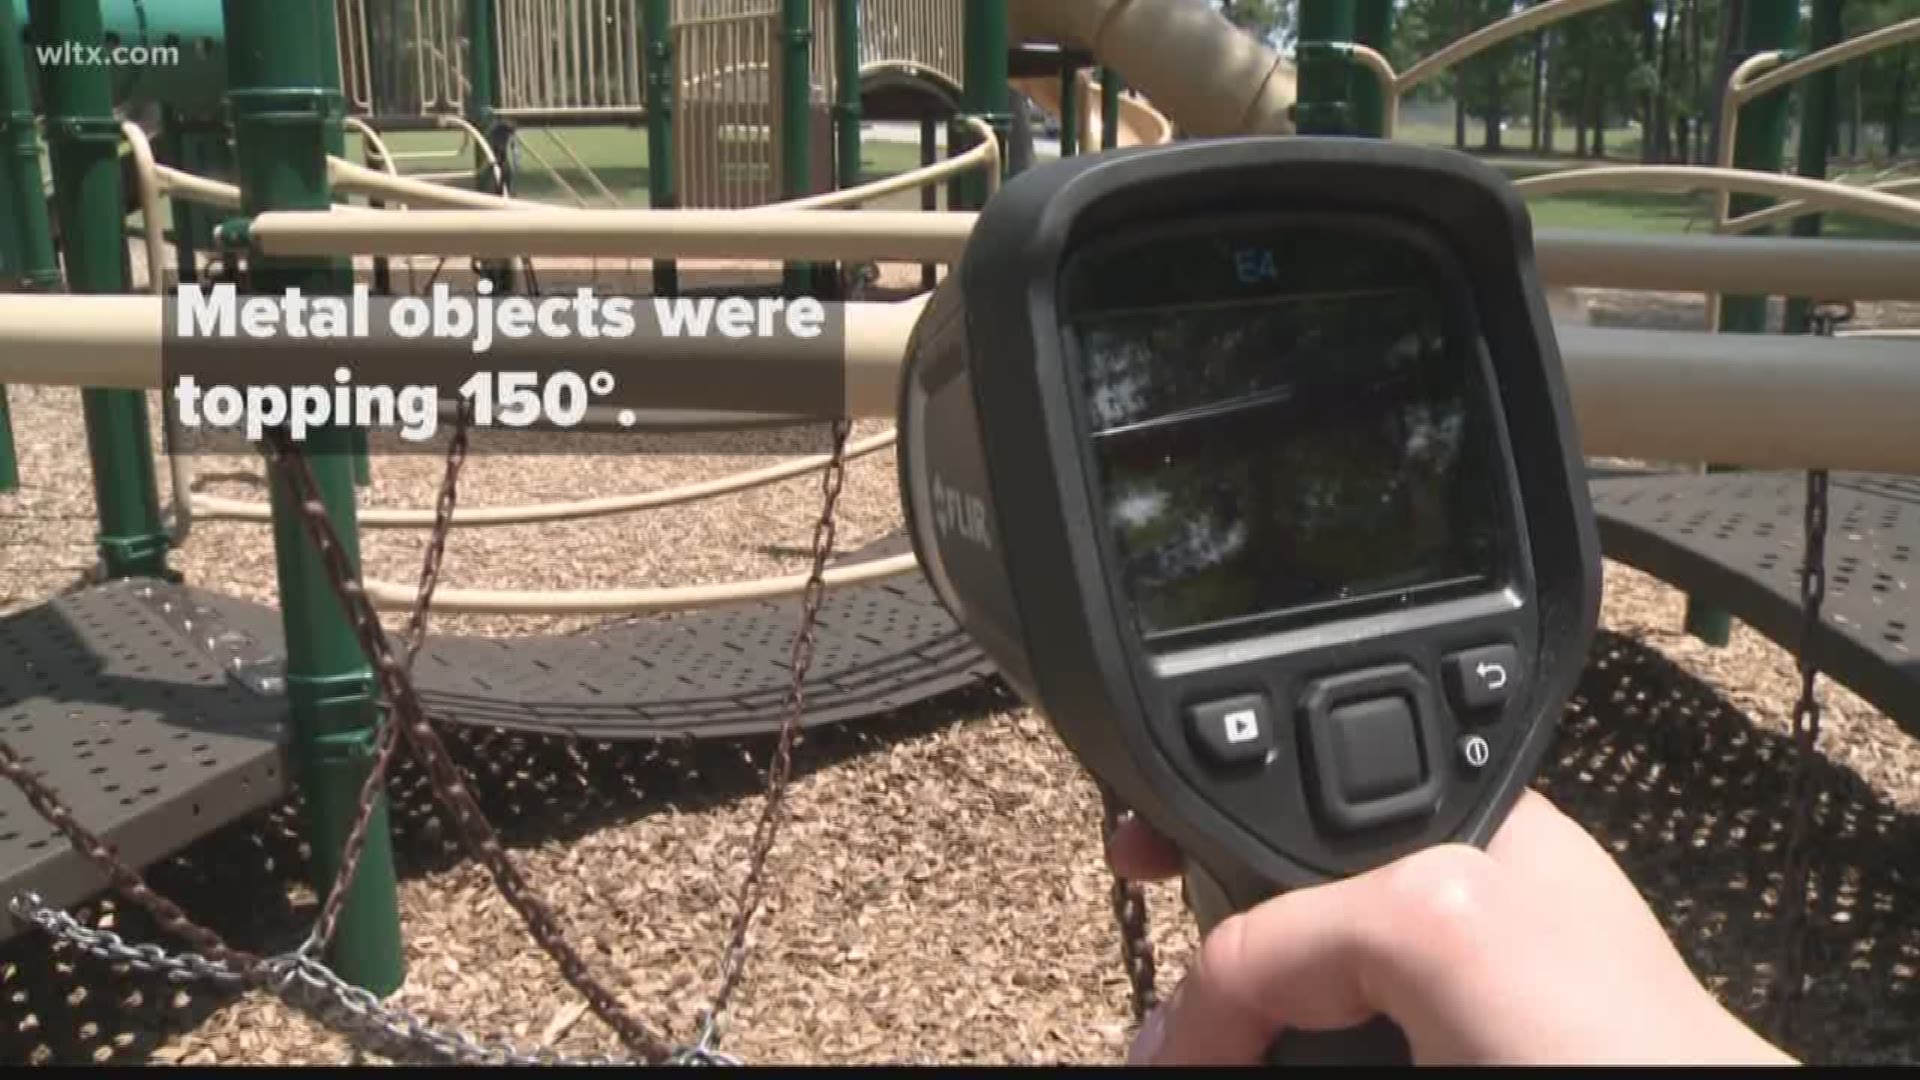 It's ALMOST summertime which means kids are heading outside to play.	But with temperatures hitting the triple digits this week, should you be worried about your kids being on the playground?